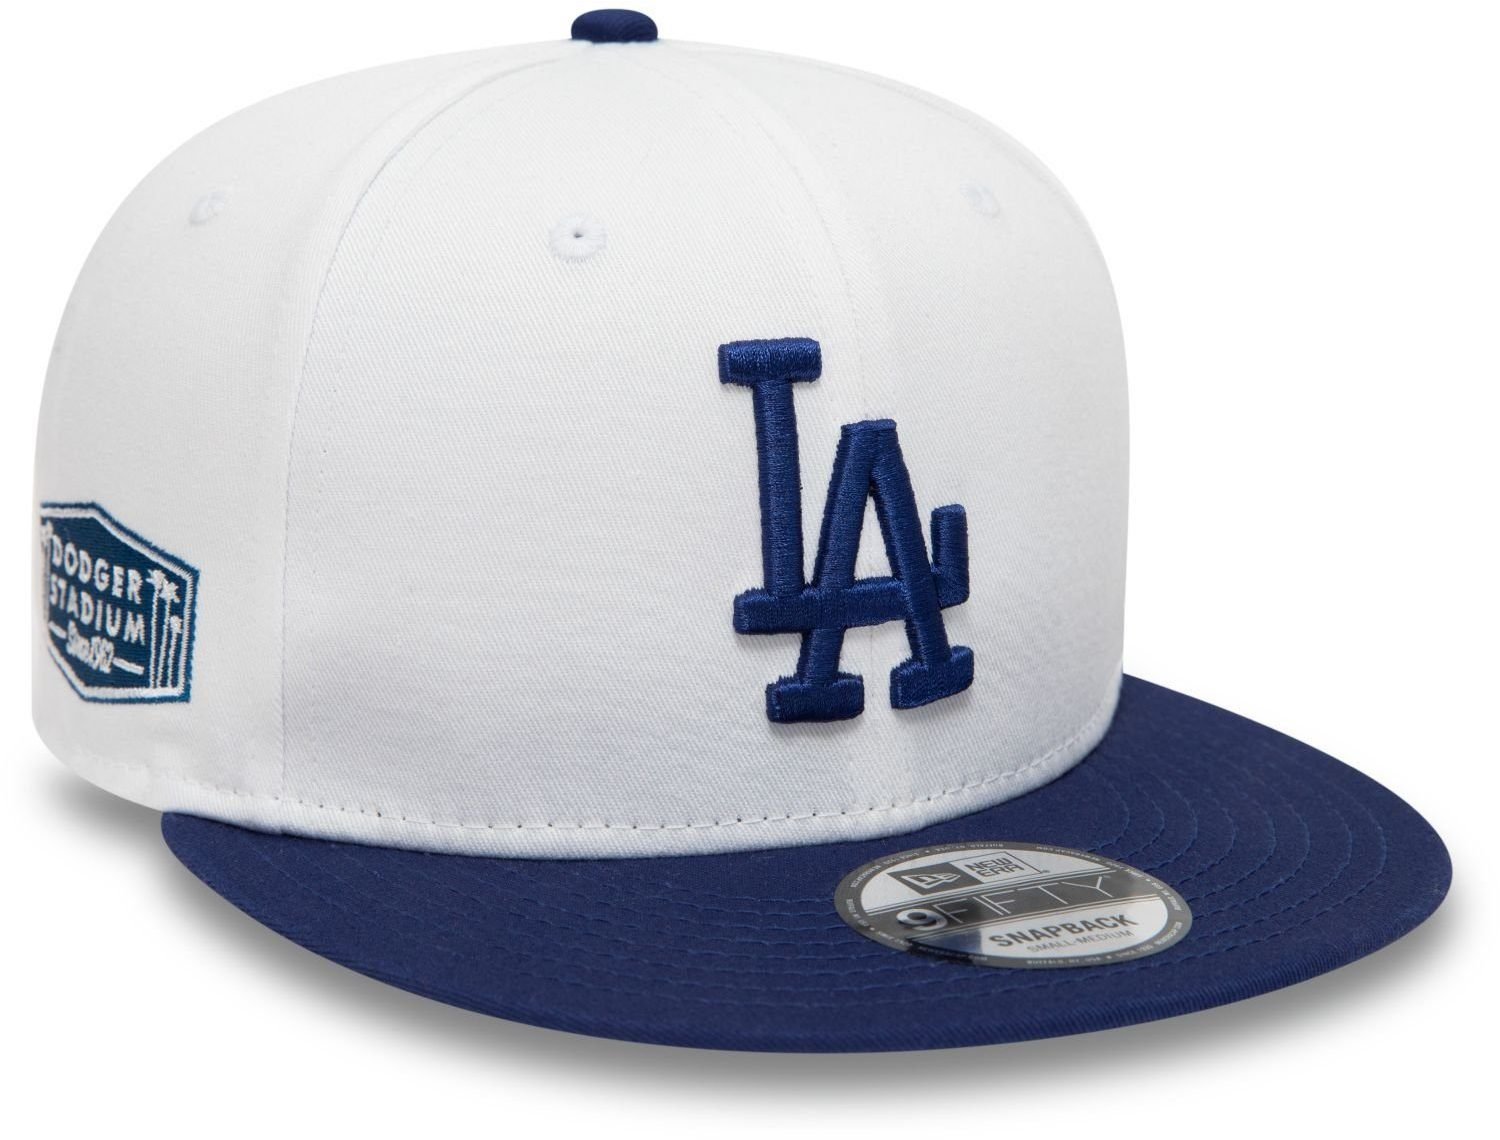 New Era White Crown Patches Snapback Test (60298818) 29,99 ab TOP Angebote 2023) white € 9Fifty Cap LA Dodgers (Oktober